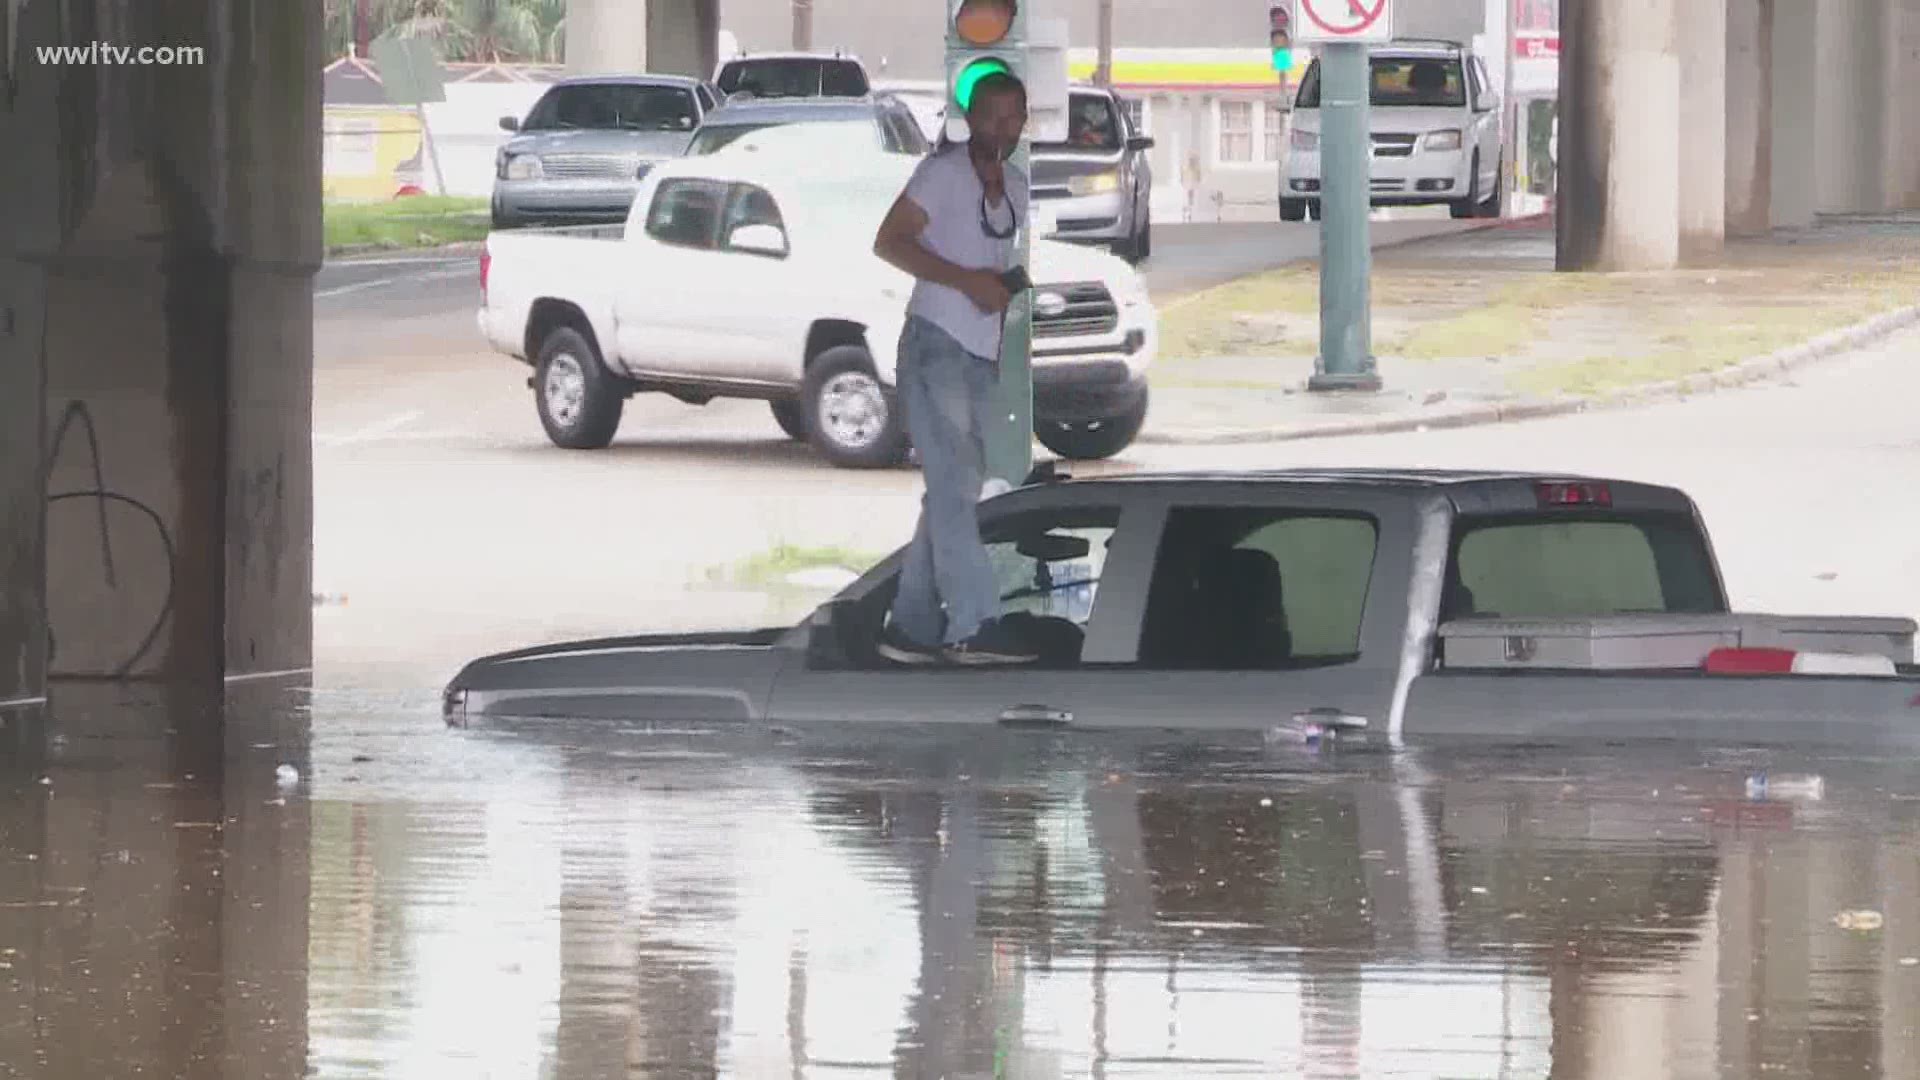 James Powell is from Picayune, Mississippi. He said he didn’t anticipate the water to be so deep. On Wednesday, he got a quick introduction to New Orleans flooding.